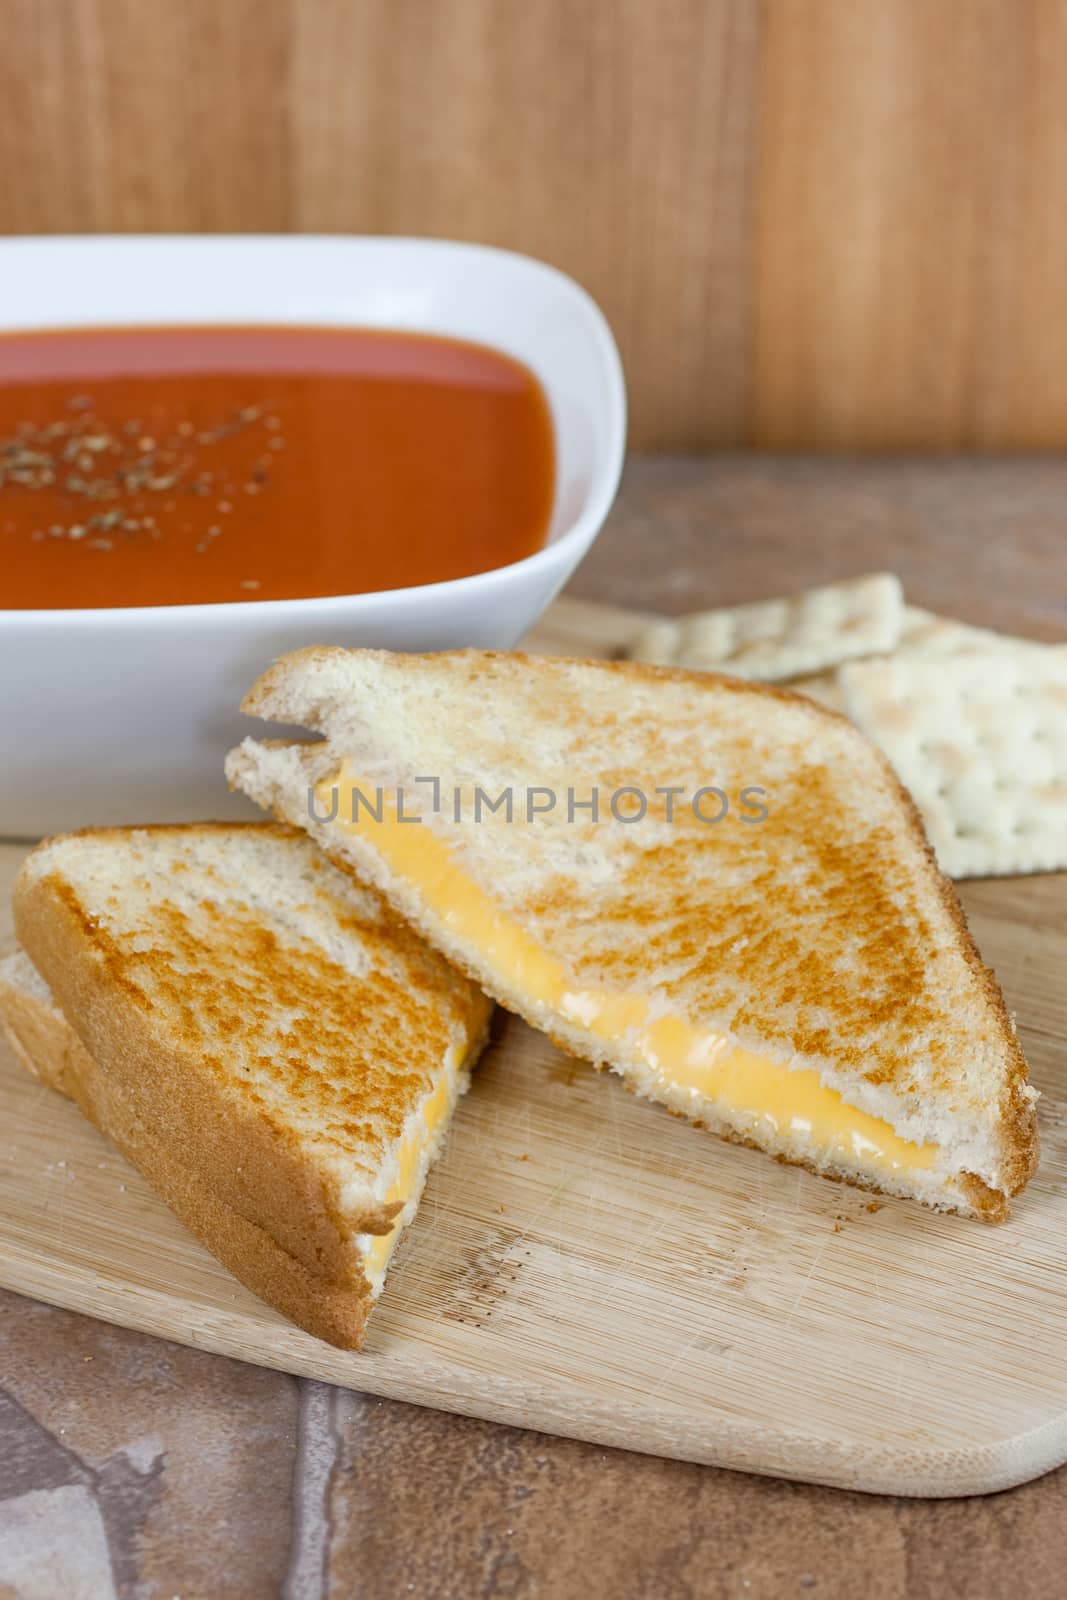 Grilled Cheese Sandwich by SouthernLightStudios